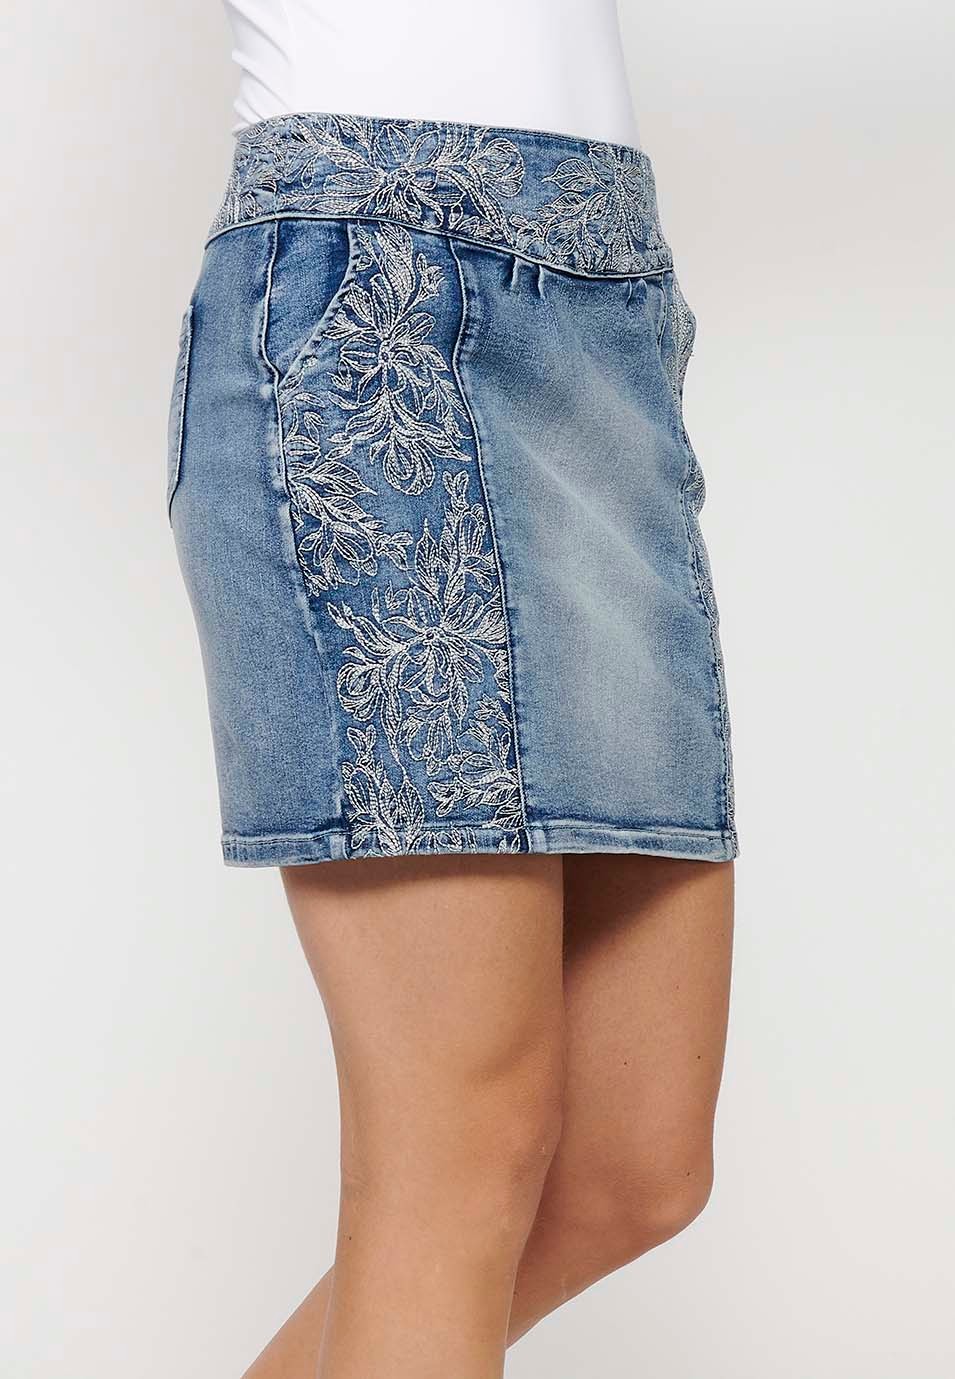 Short denim skirt with wide embroidered waist and floral embroidered details with side zipper closure in Blue for Women 4